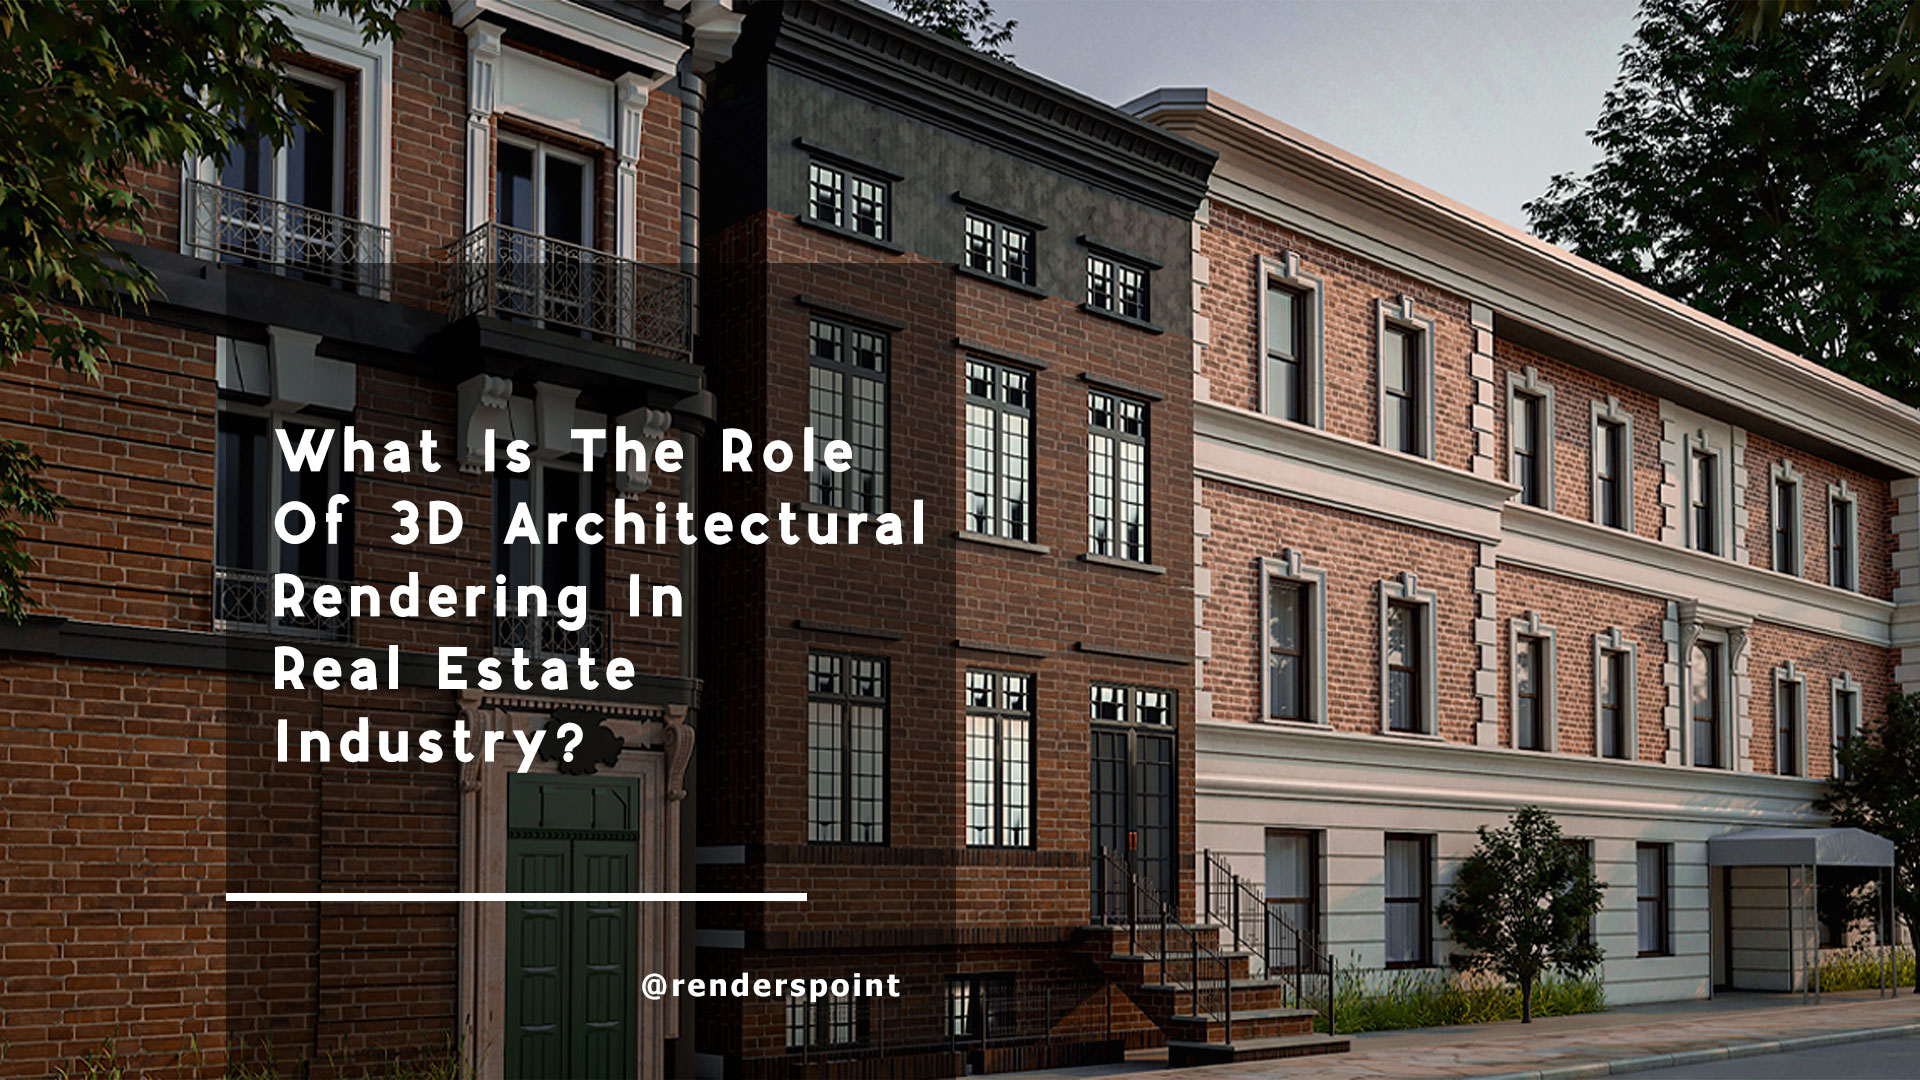 What is the Role of 3D Architectural Rendering in Real Estate Industry?